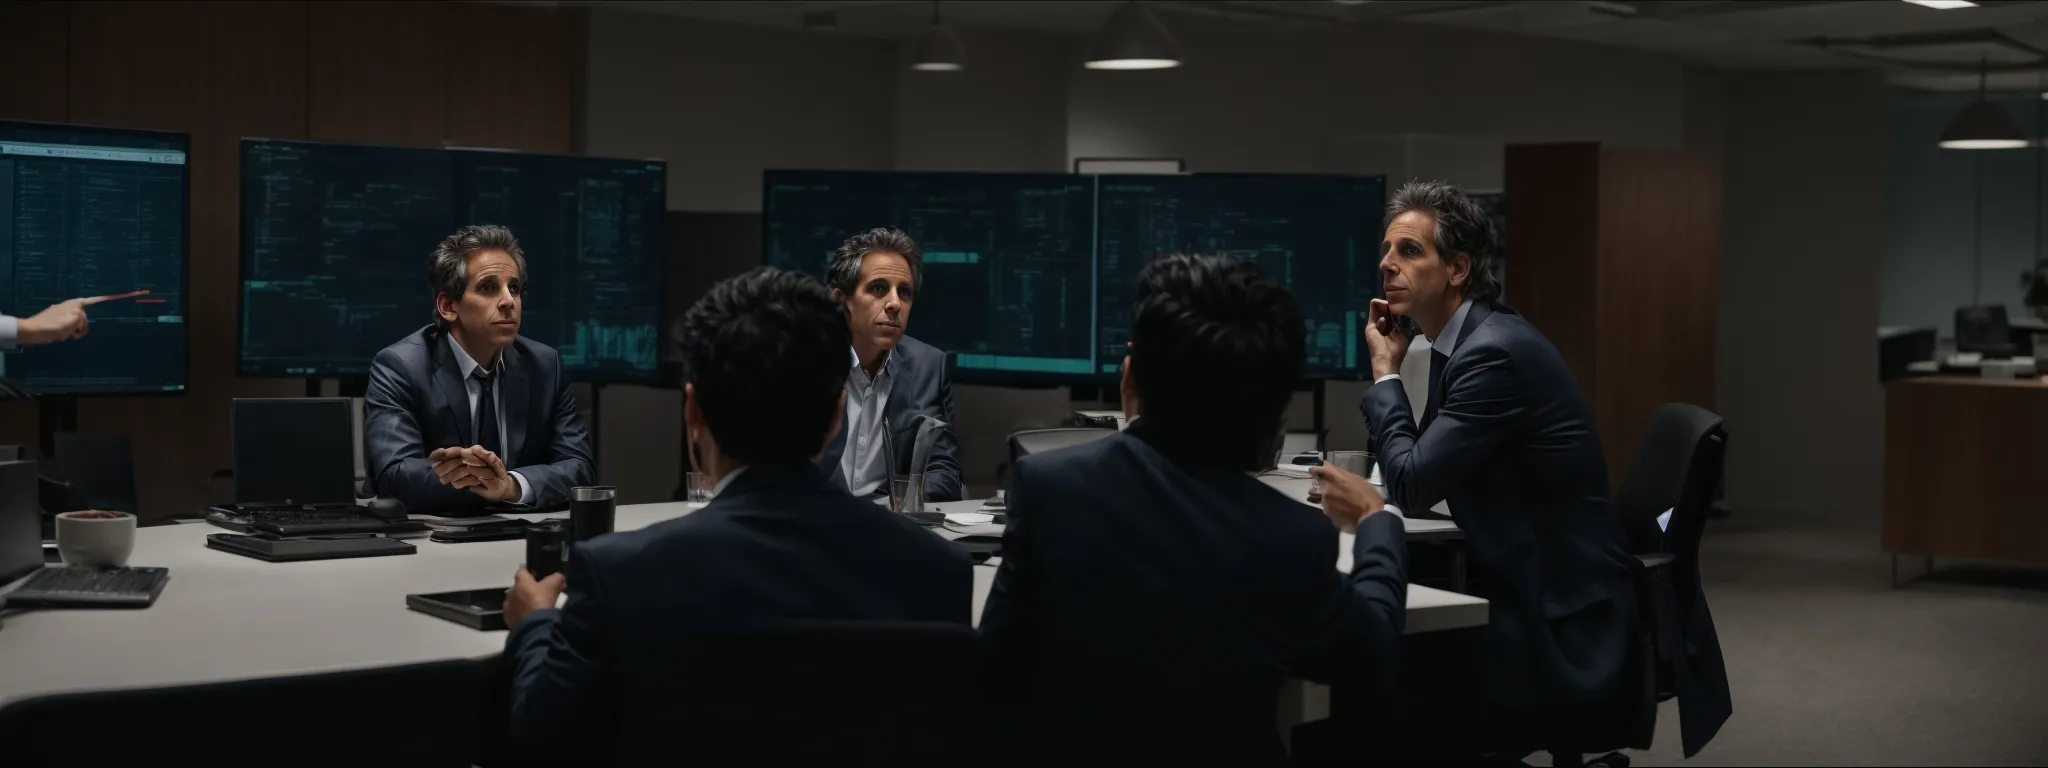 ben stiller consults with a group of seo experts in a sleek, modern office, engrossed in a strategy session for his role in 